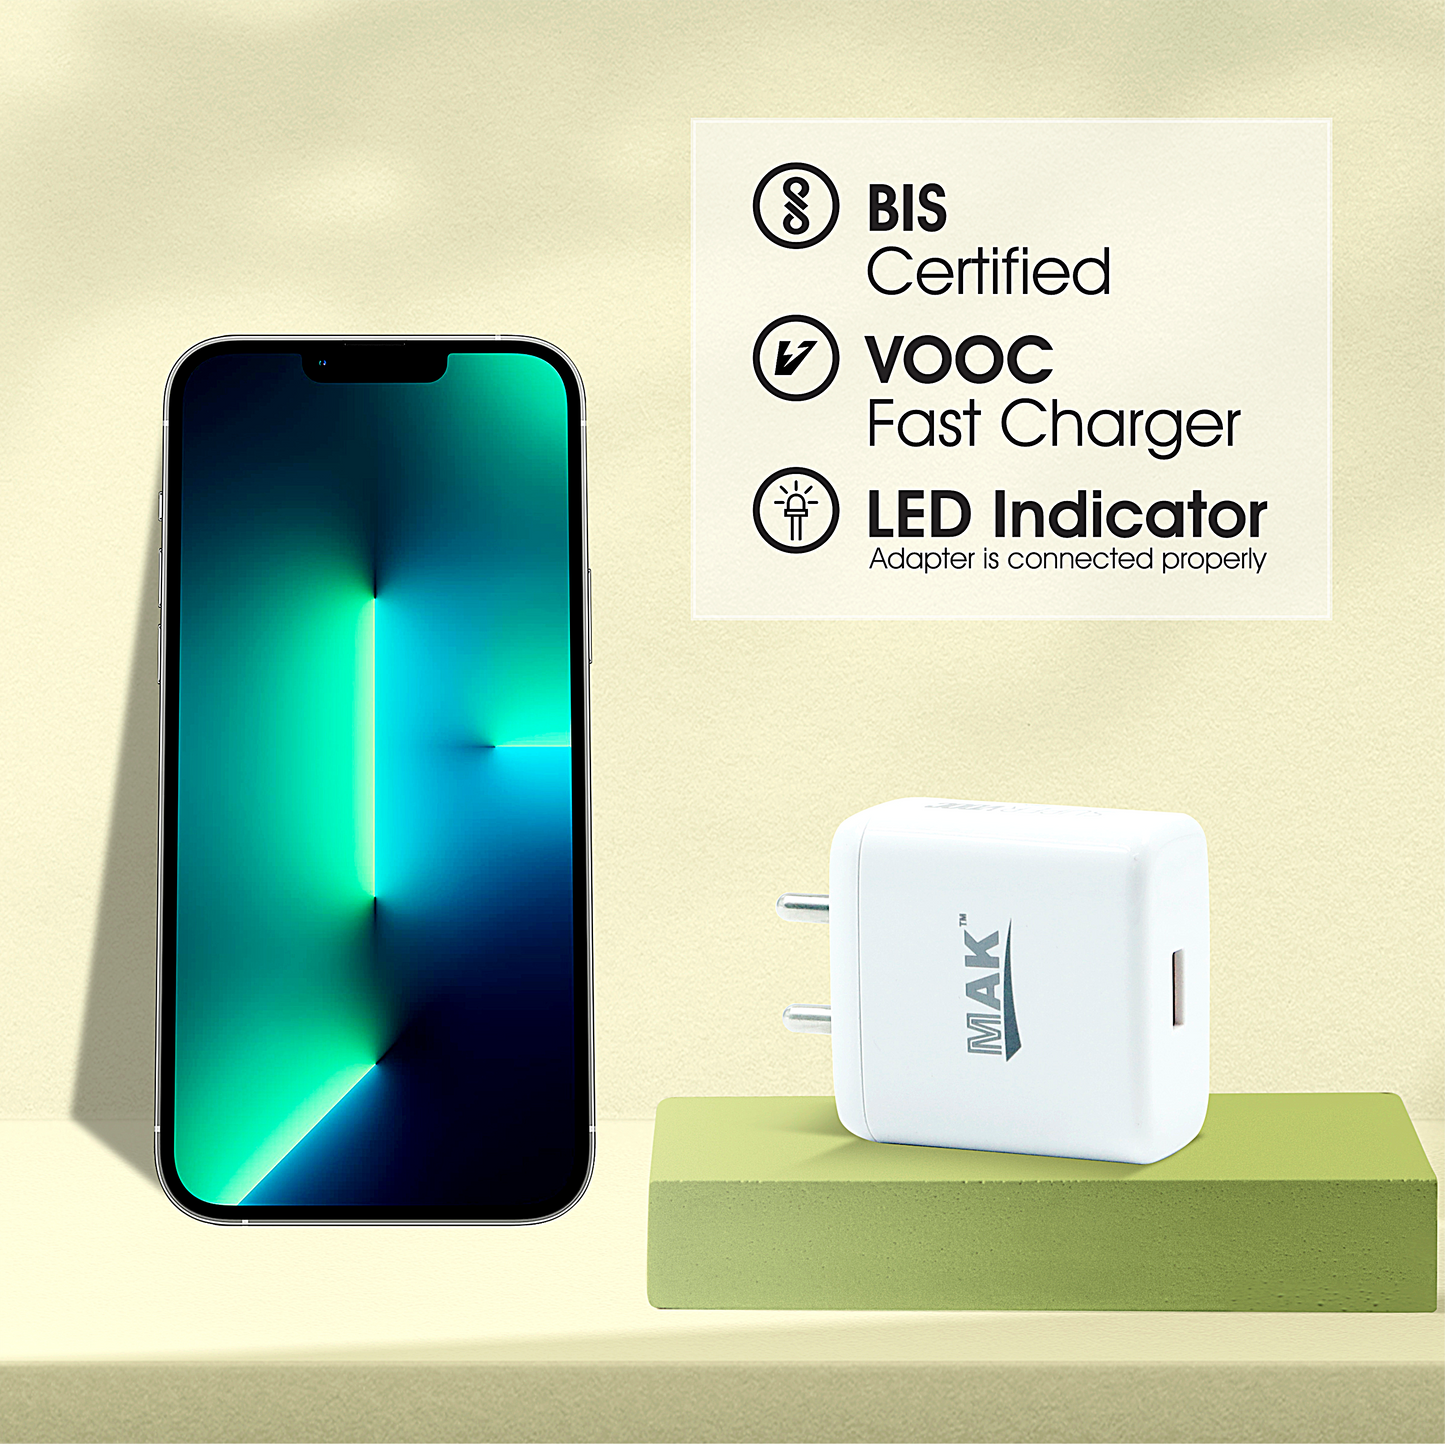 35W VOOC Charger with Fast Charging USB Type C Cable (White)